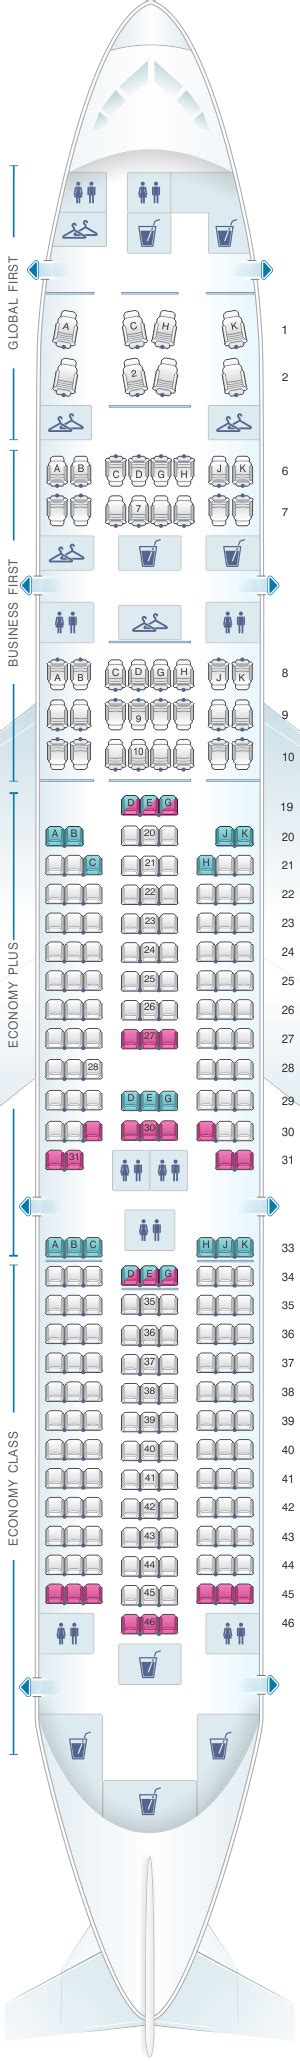 Economy. Standard seat. 31. 17.1. 24-53. 234. there are no reviews yet. Find the best seat wiht our United Boeing 777-200 (777) v4 seating chart. Use this seat map to get the most comfortable seats, legroom and recline before booking.. 